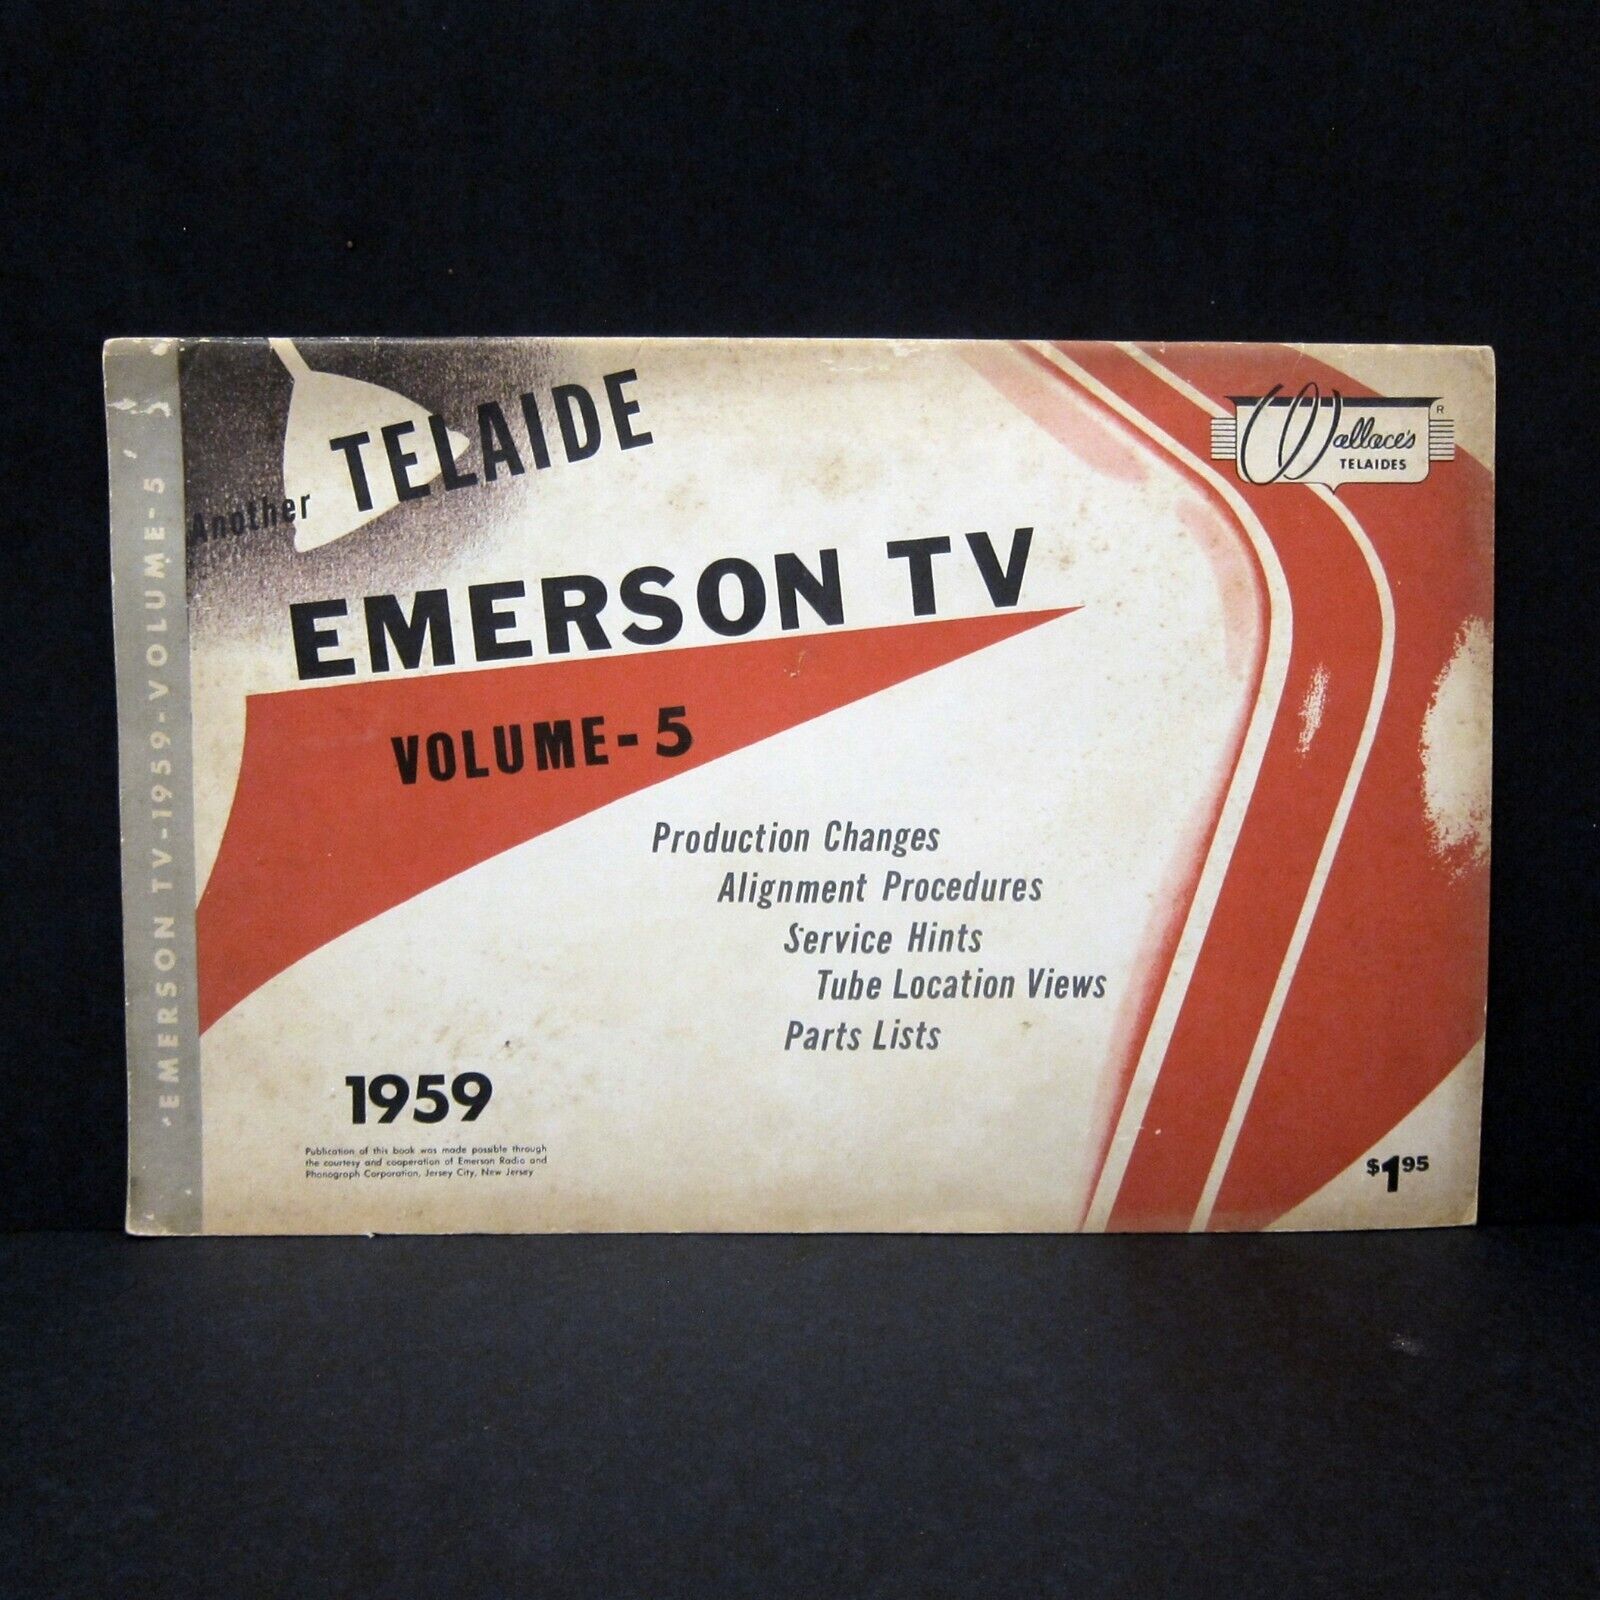 EMERSON 1959 TV SERVICE MANUAL - Large Format